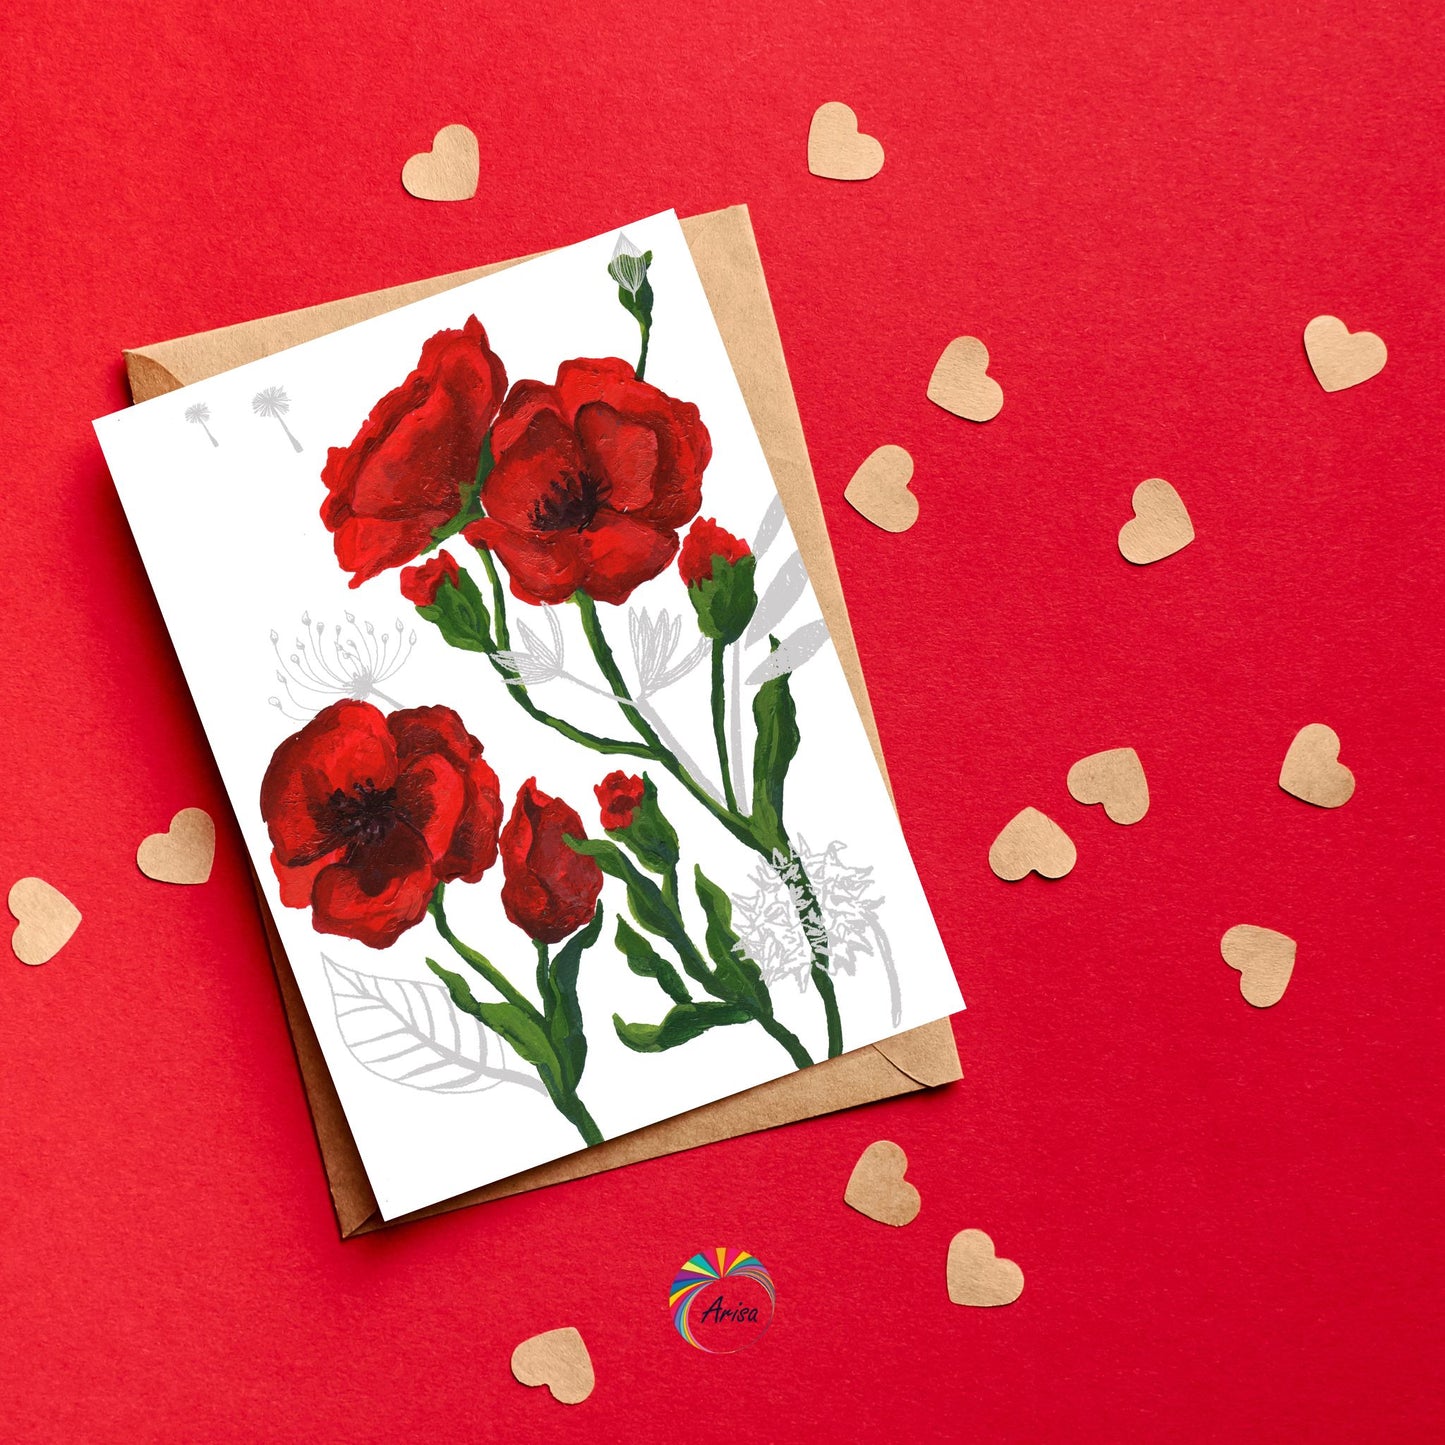 "Sincere Beauty" Greeting Card by ArisaTeam surrounded by small hearts in a red background ideal as a Valentine card.